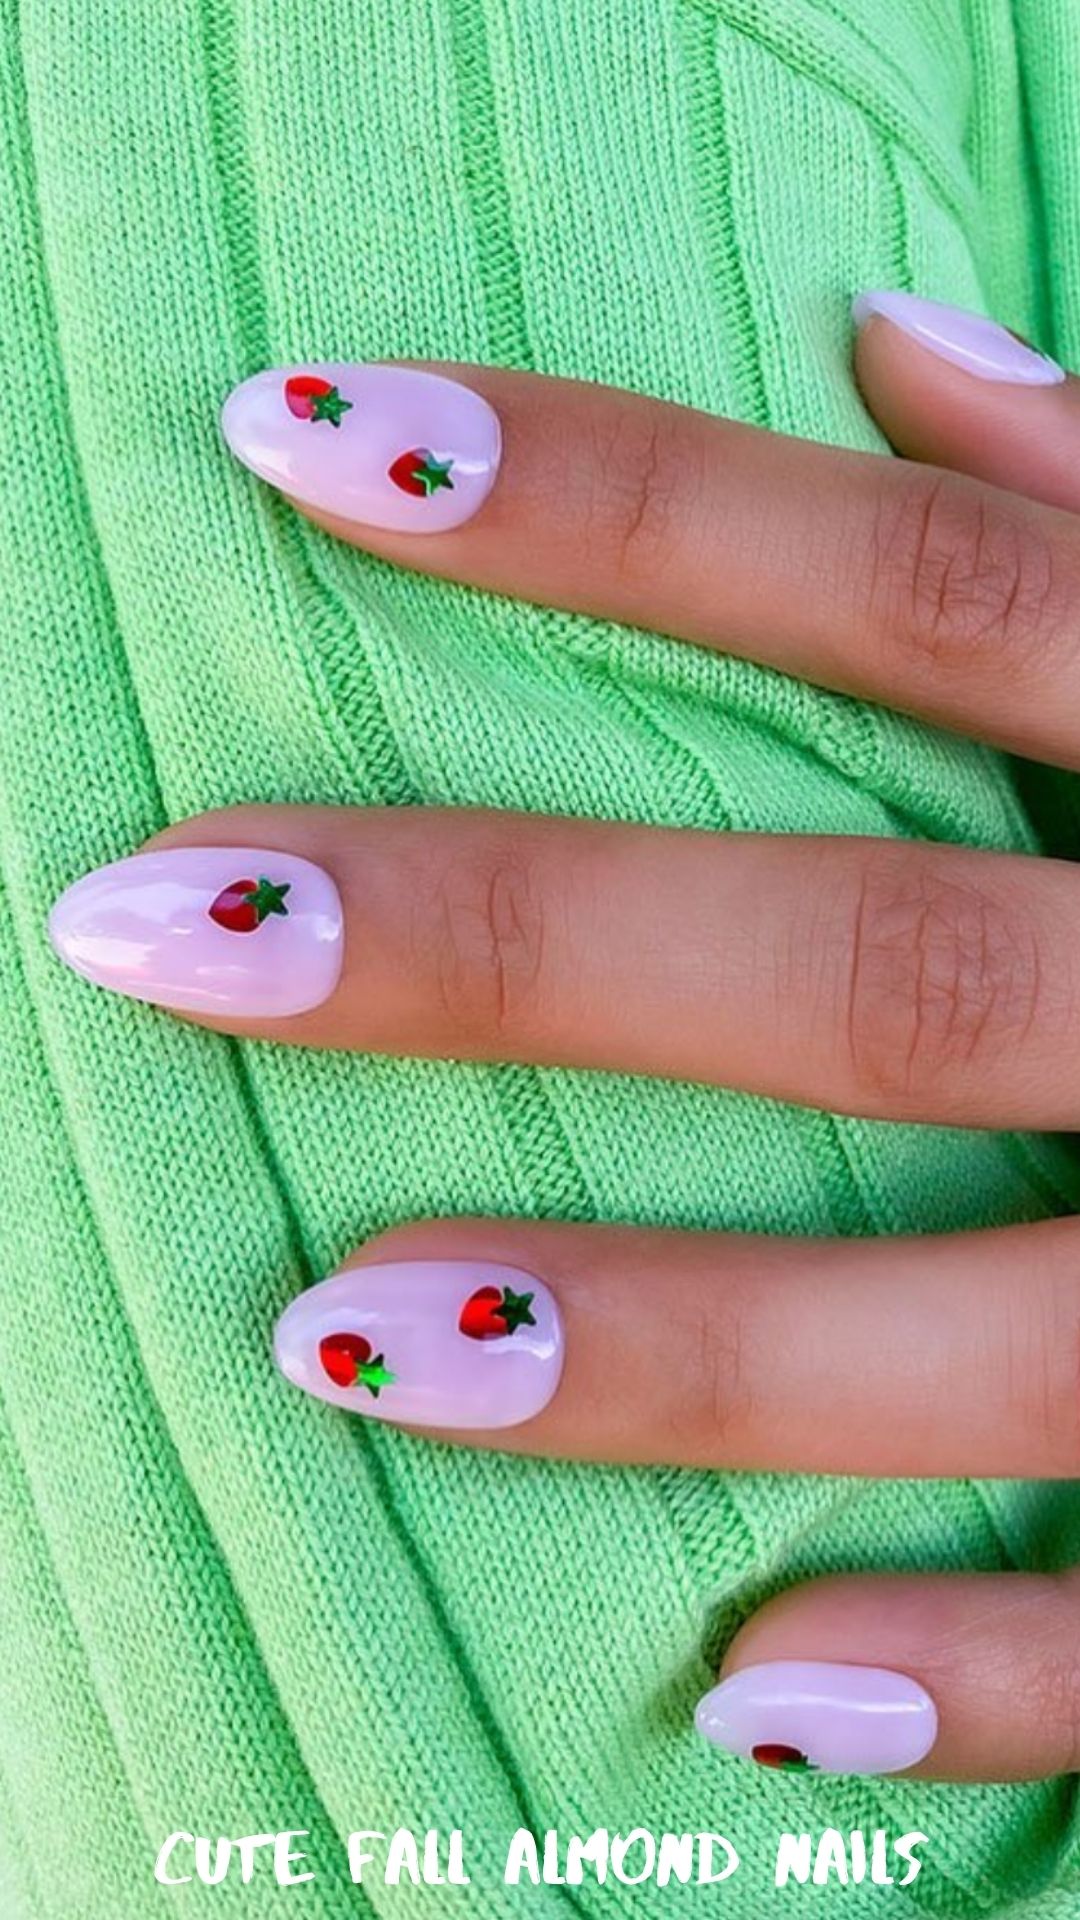  Best Short almond nails designs and Fall nail colors 2021 to try!